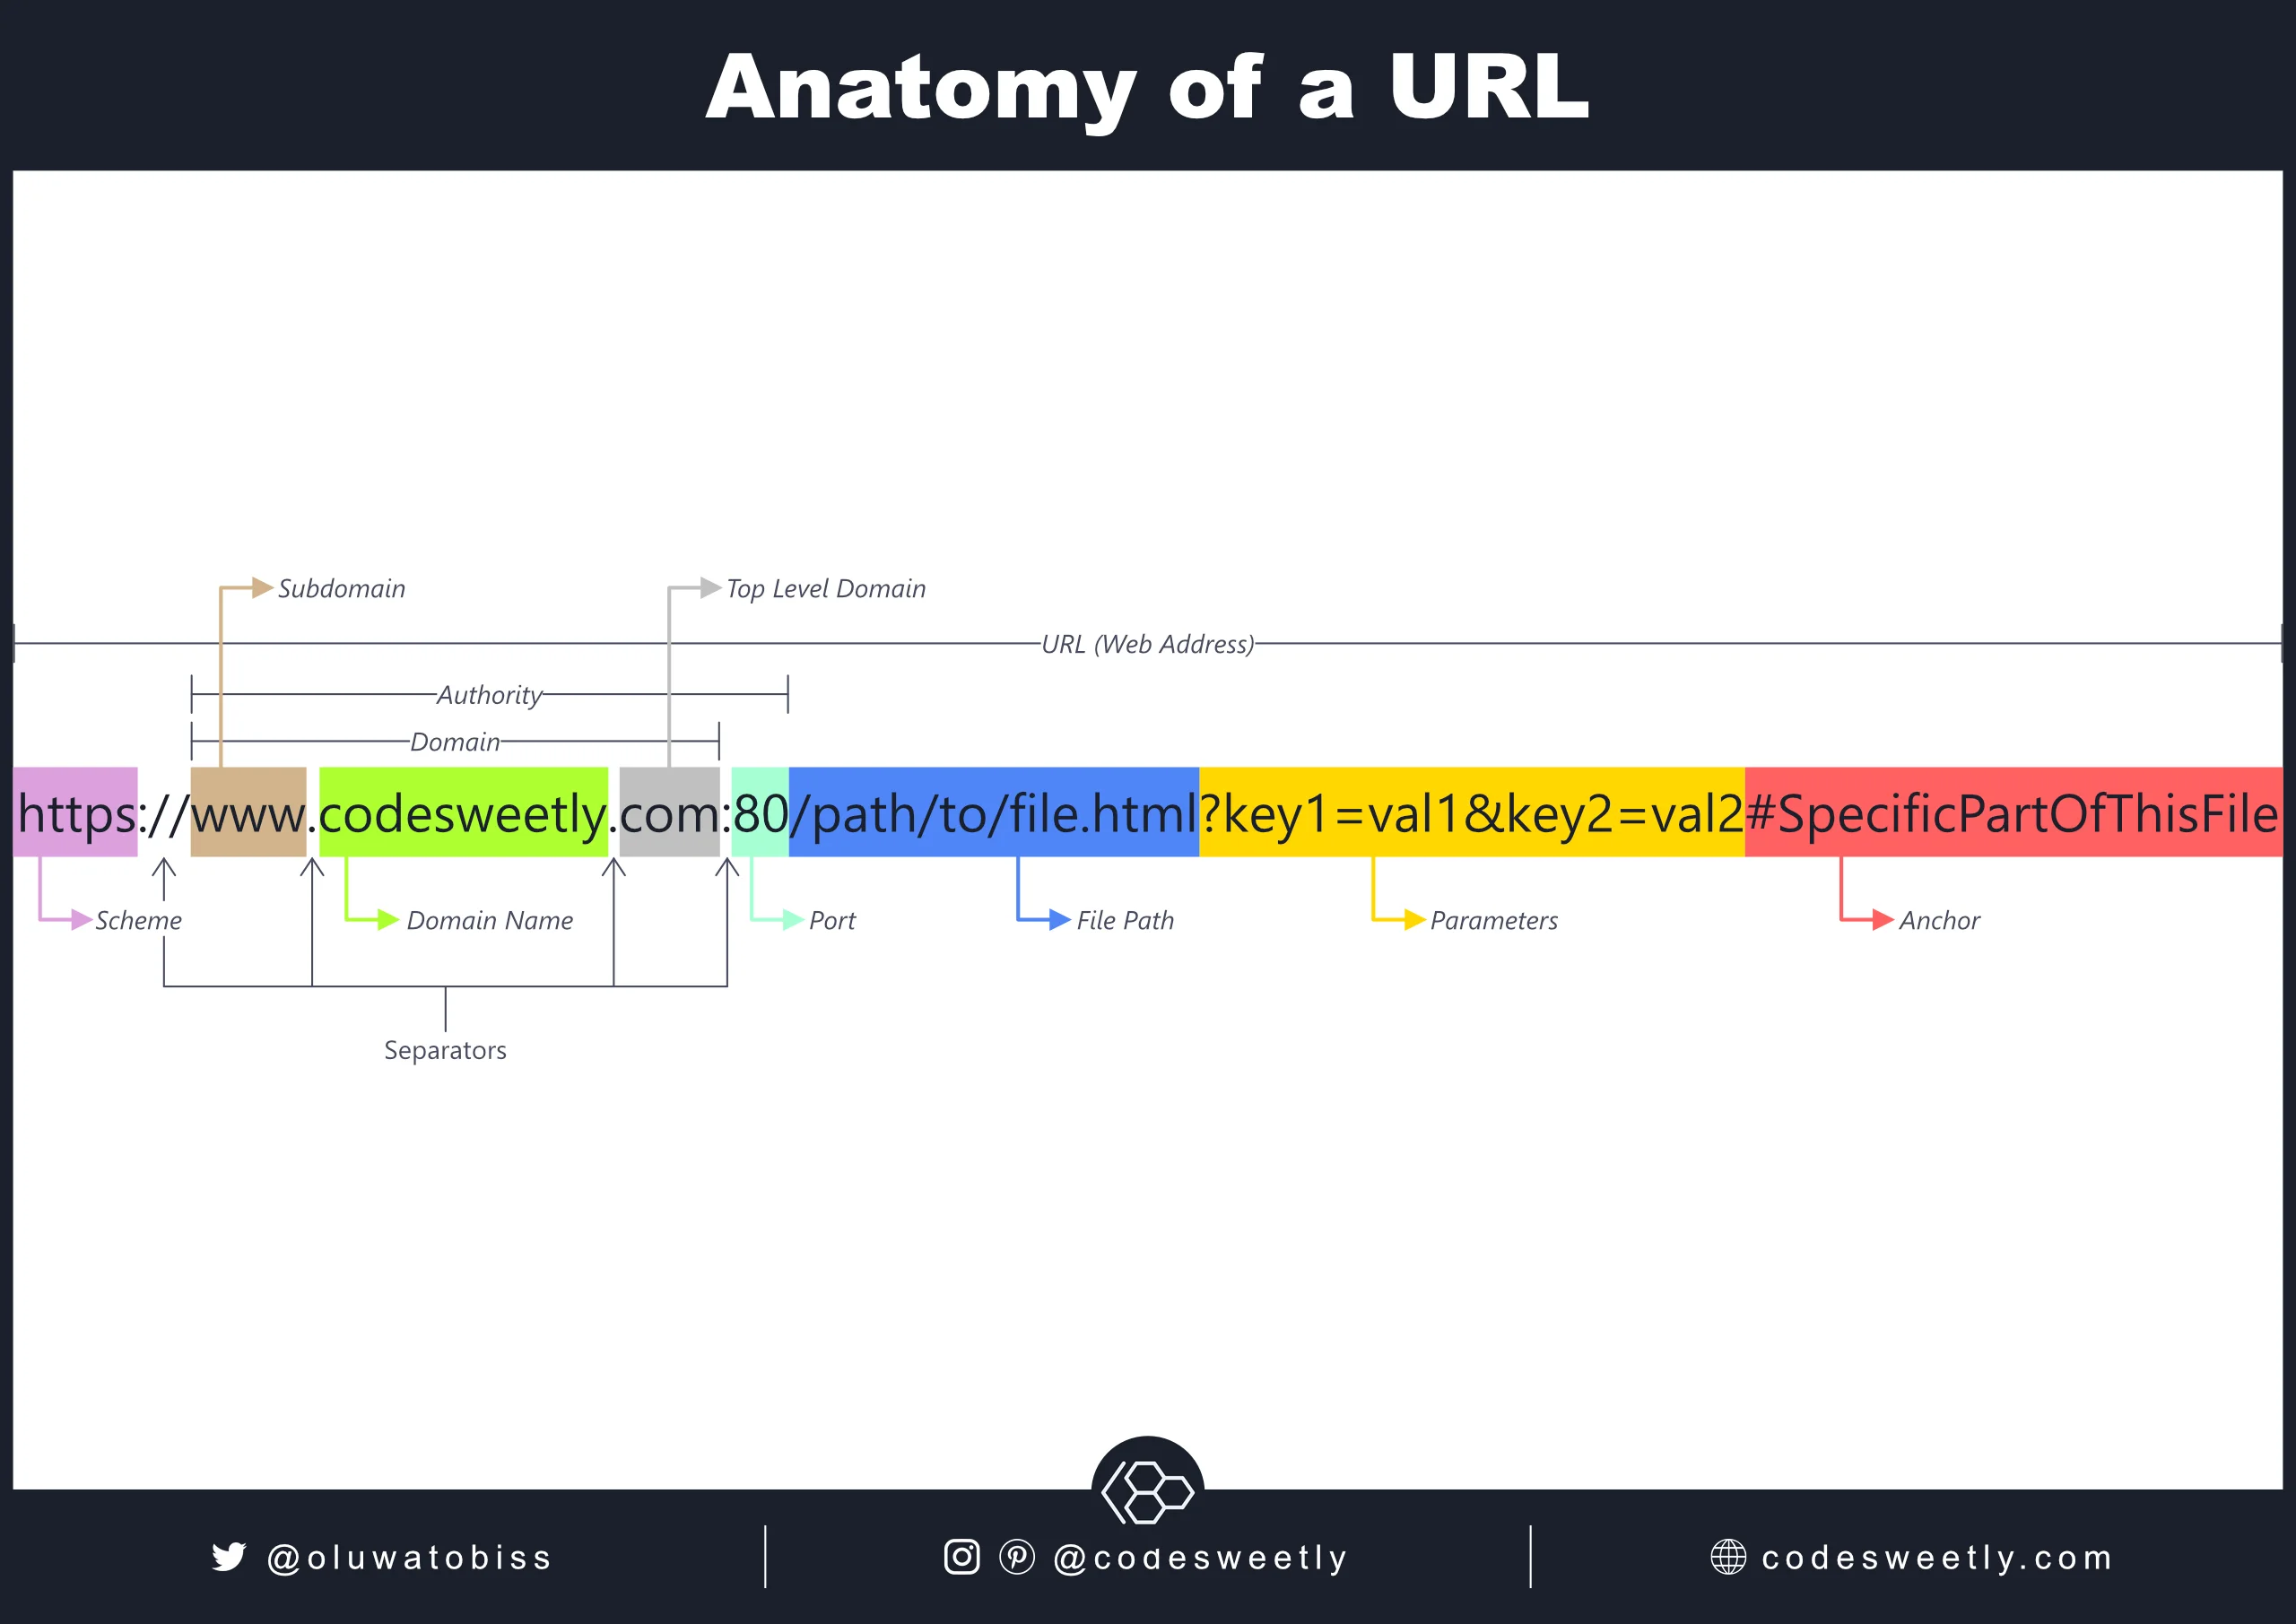 A URL consists of a scheme, domain, port, file path, one or more parameters, and an anchor.